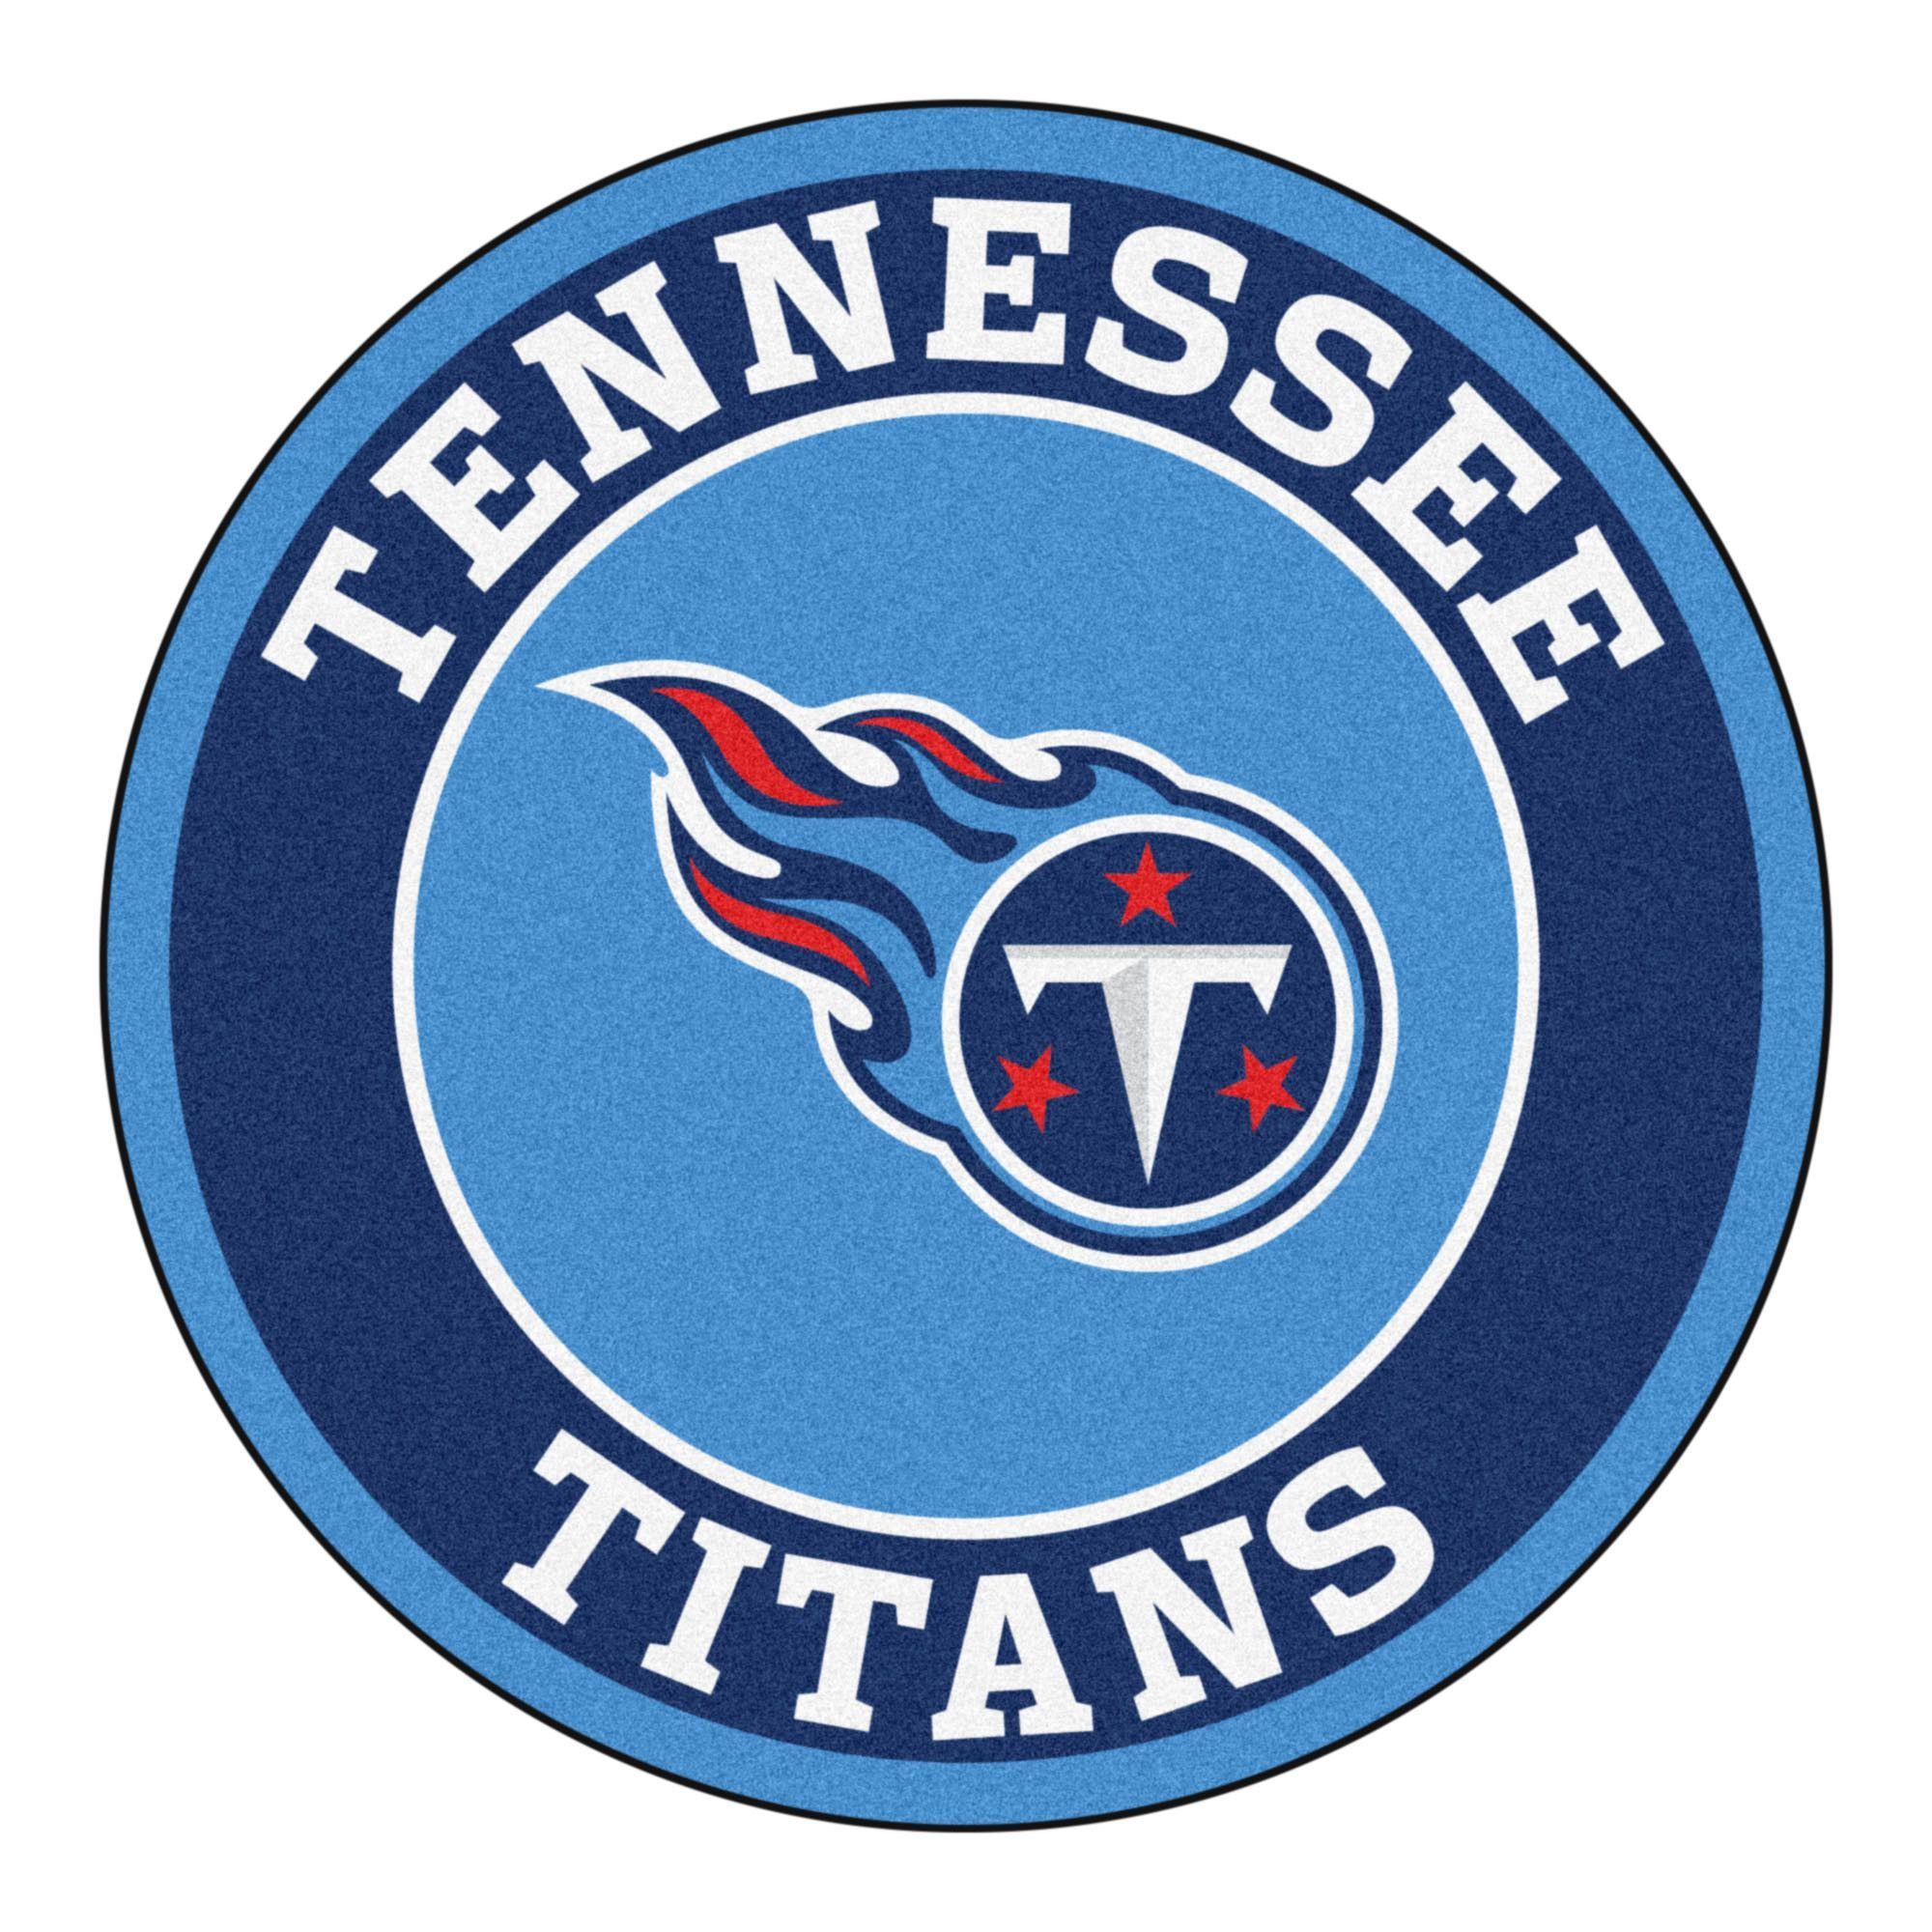 Tennessee Titans Logo - For all those NFL fans out there, these 27 round rugs featuring